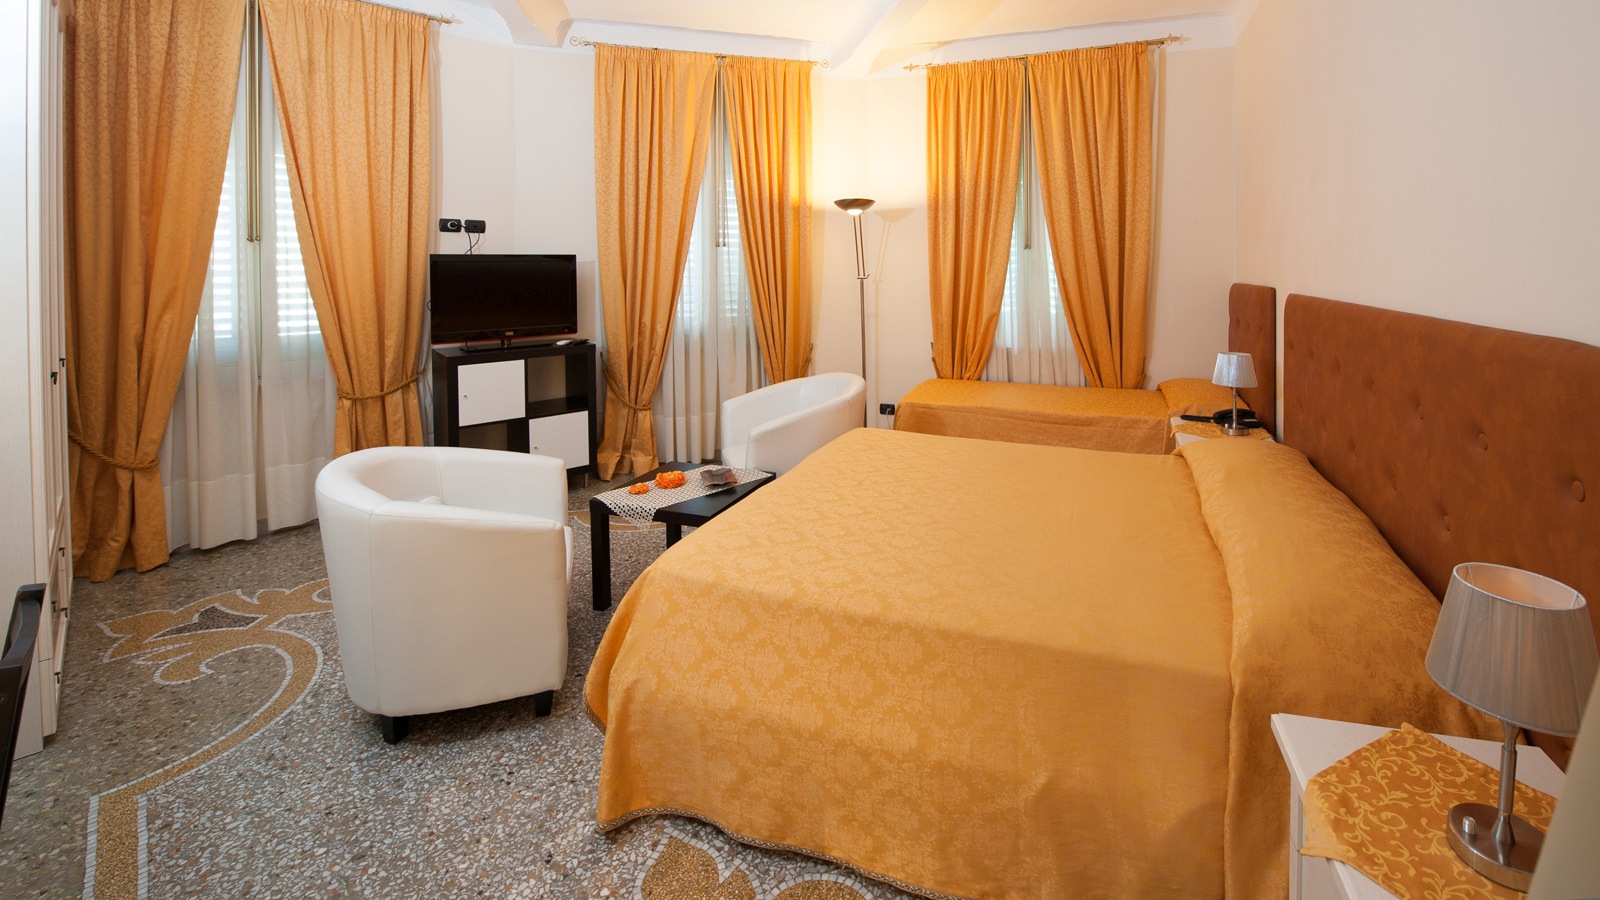 Bed and Breakfast Lepanto Messina